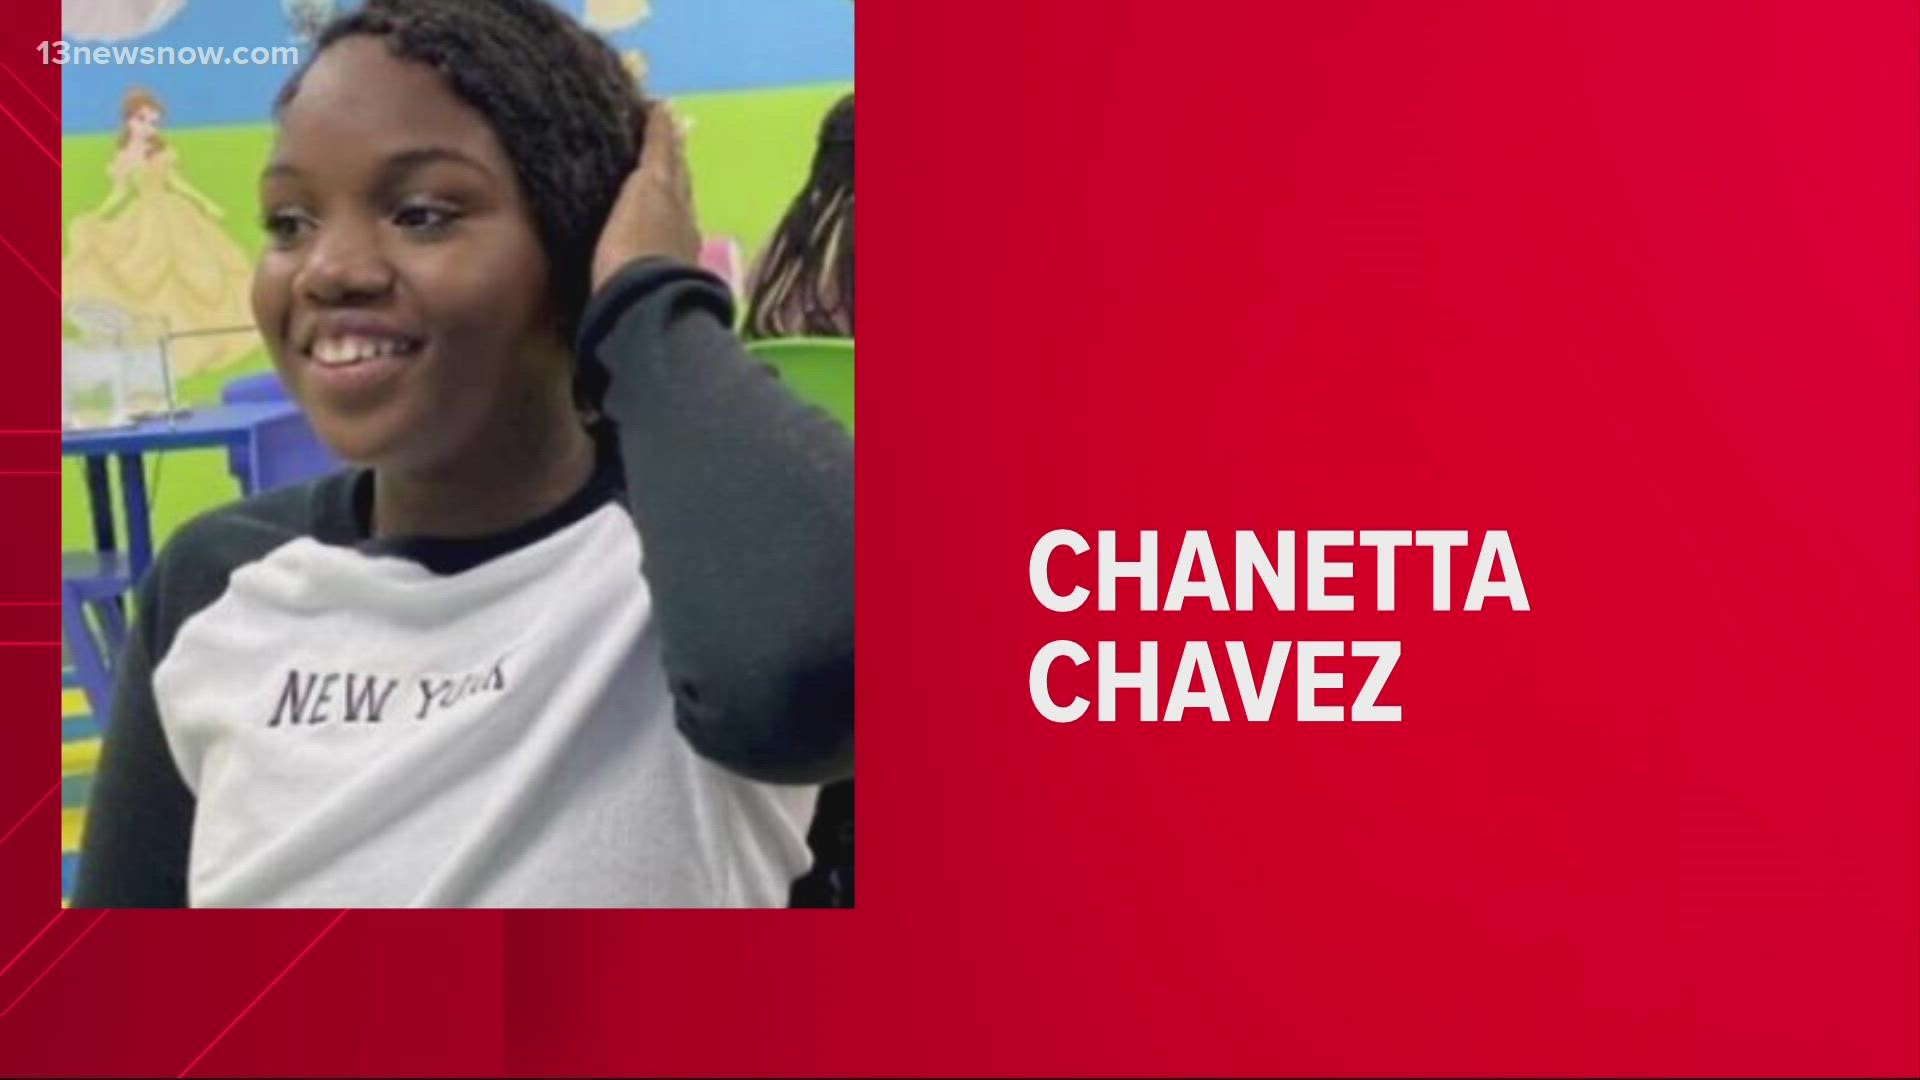 Chavez was last seen on January 18.